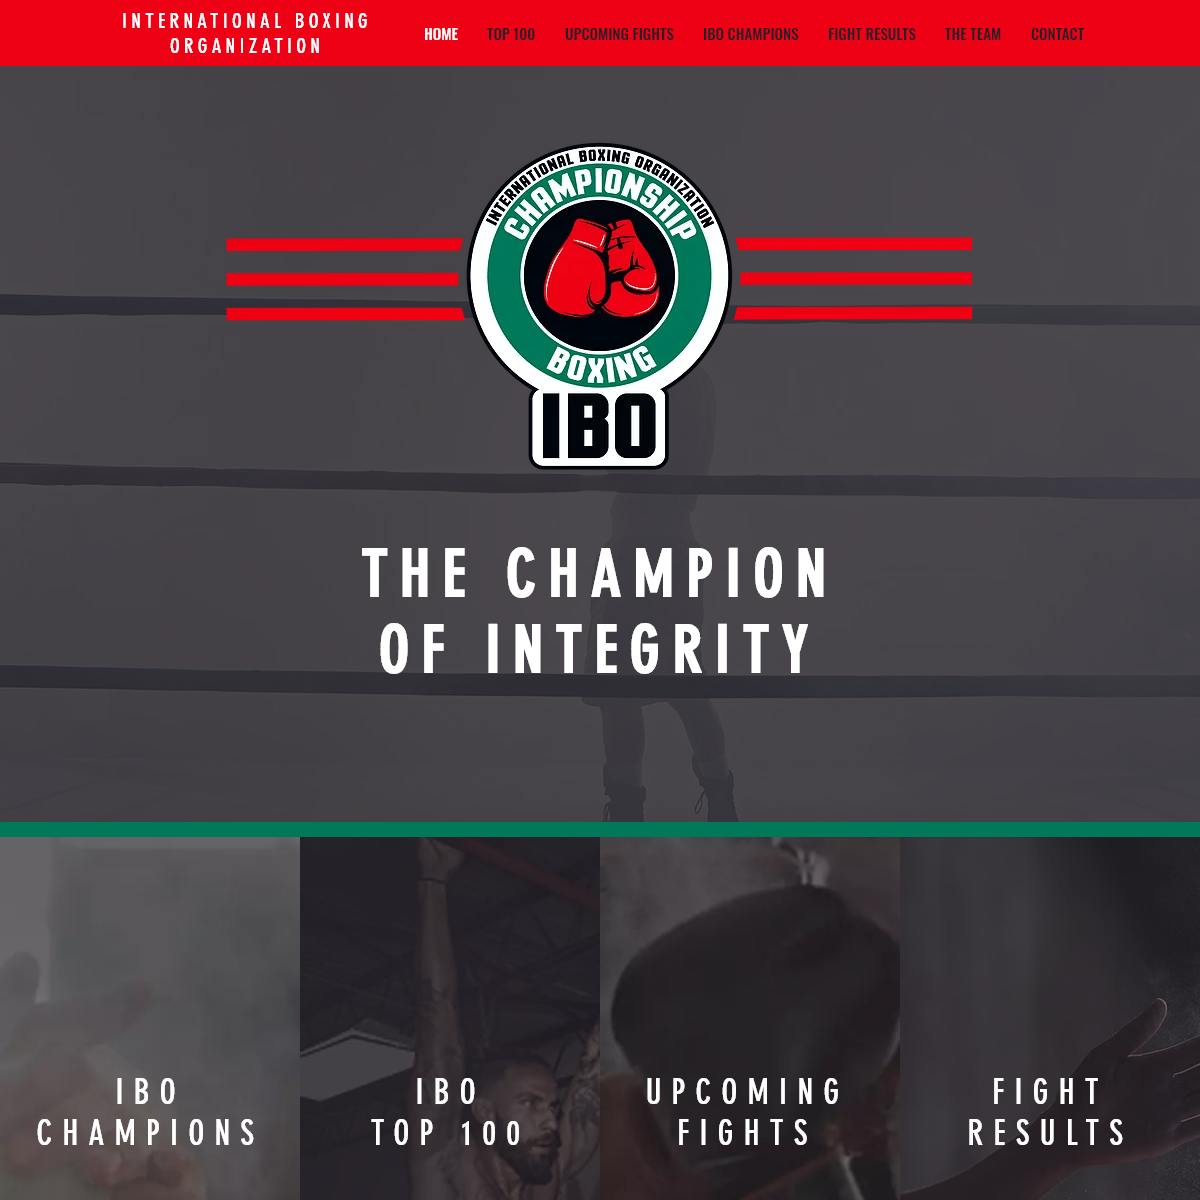 A complete backup of iboboxing.com